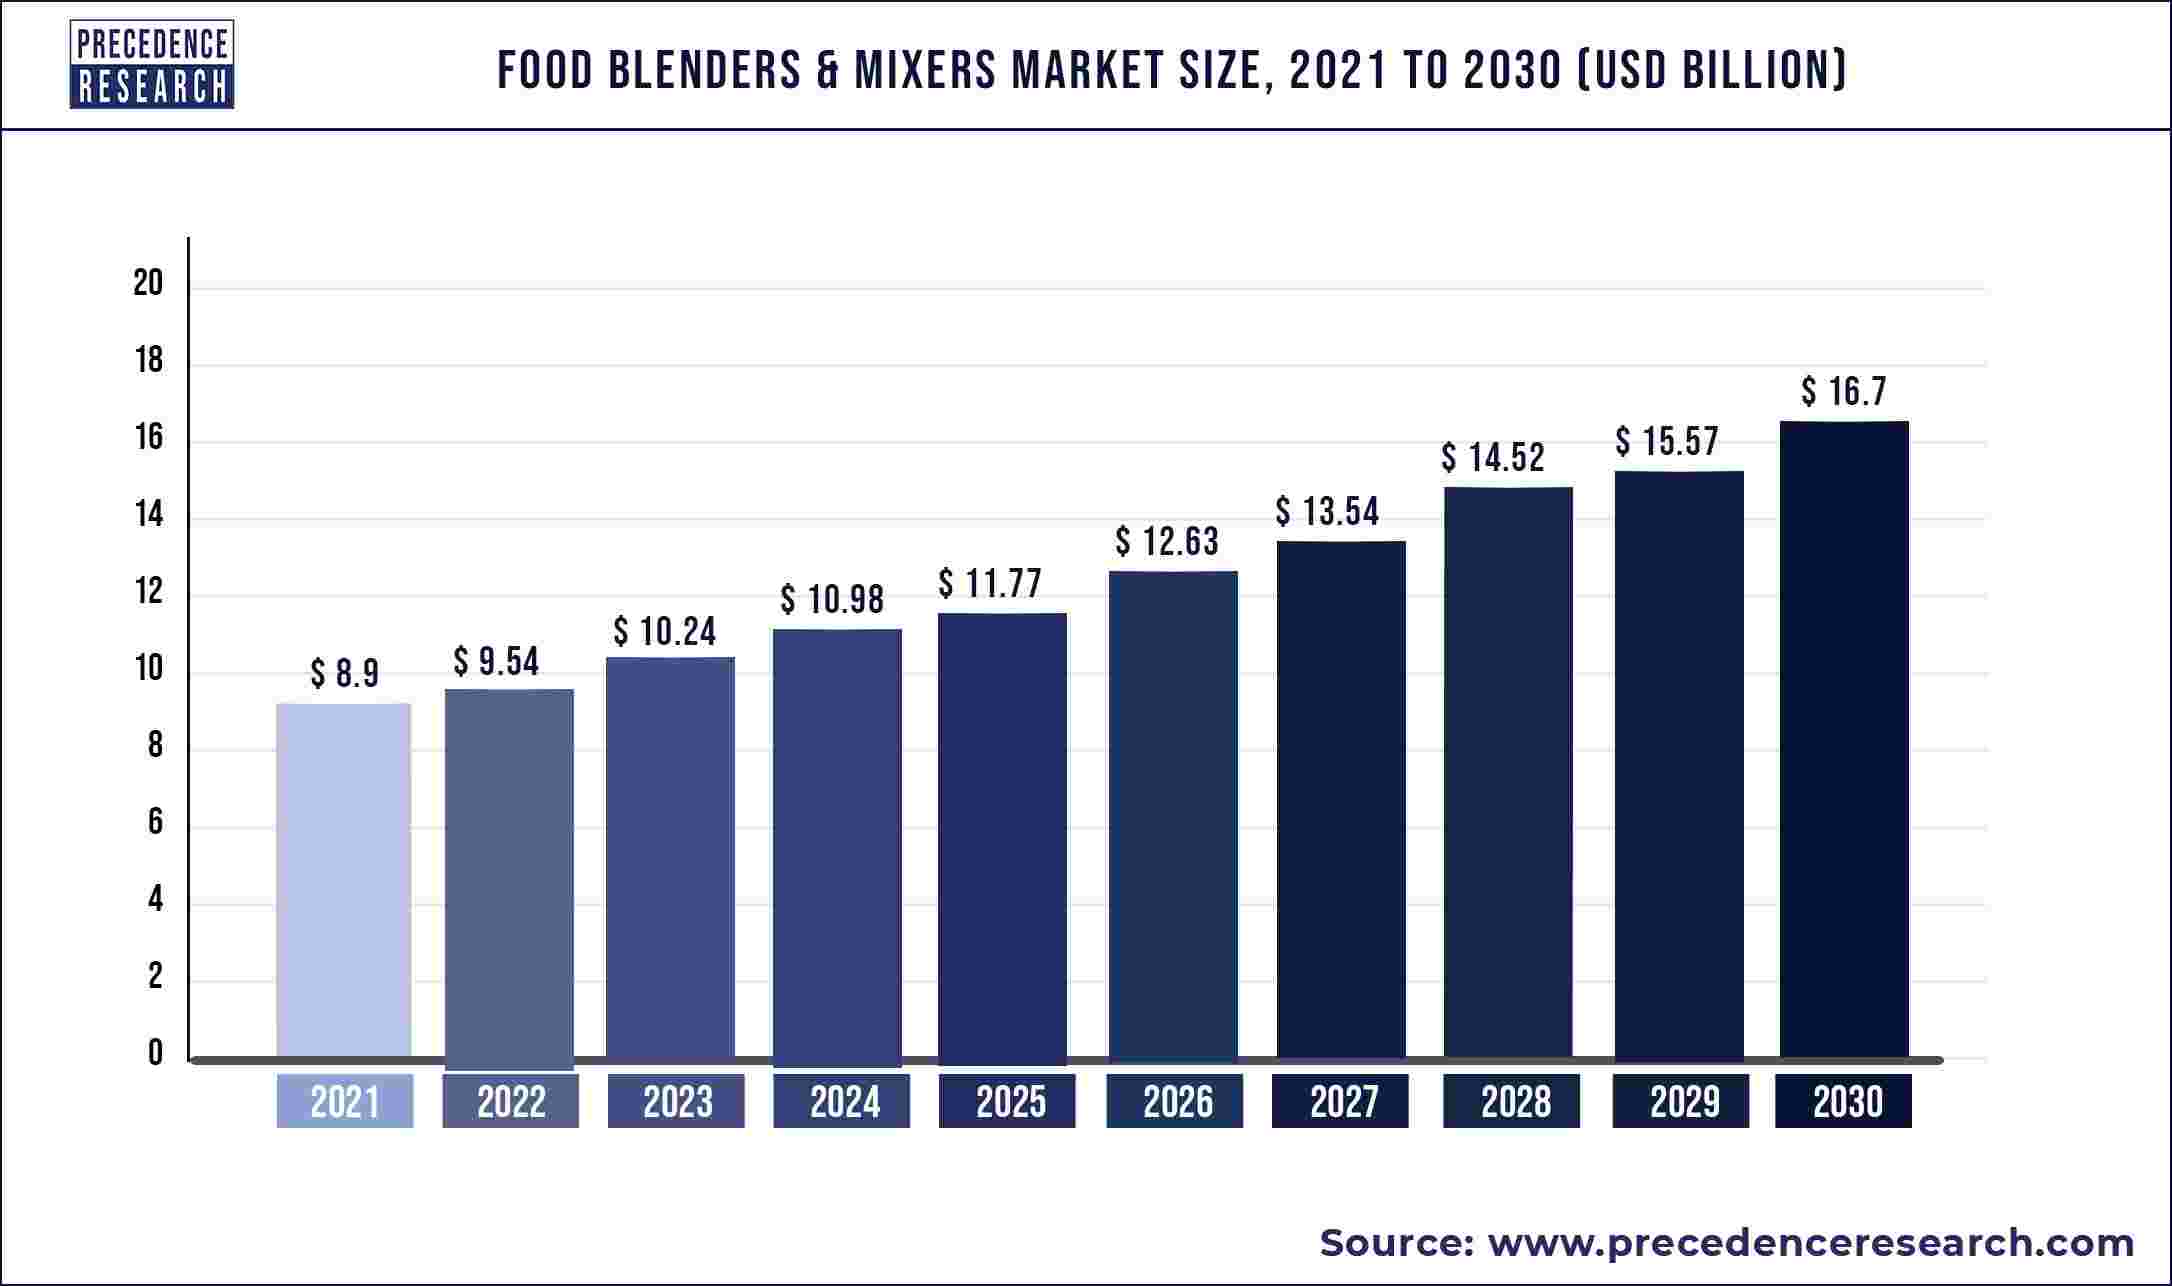 Food Blenders and Mixers Market Size 2022 To 2030